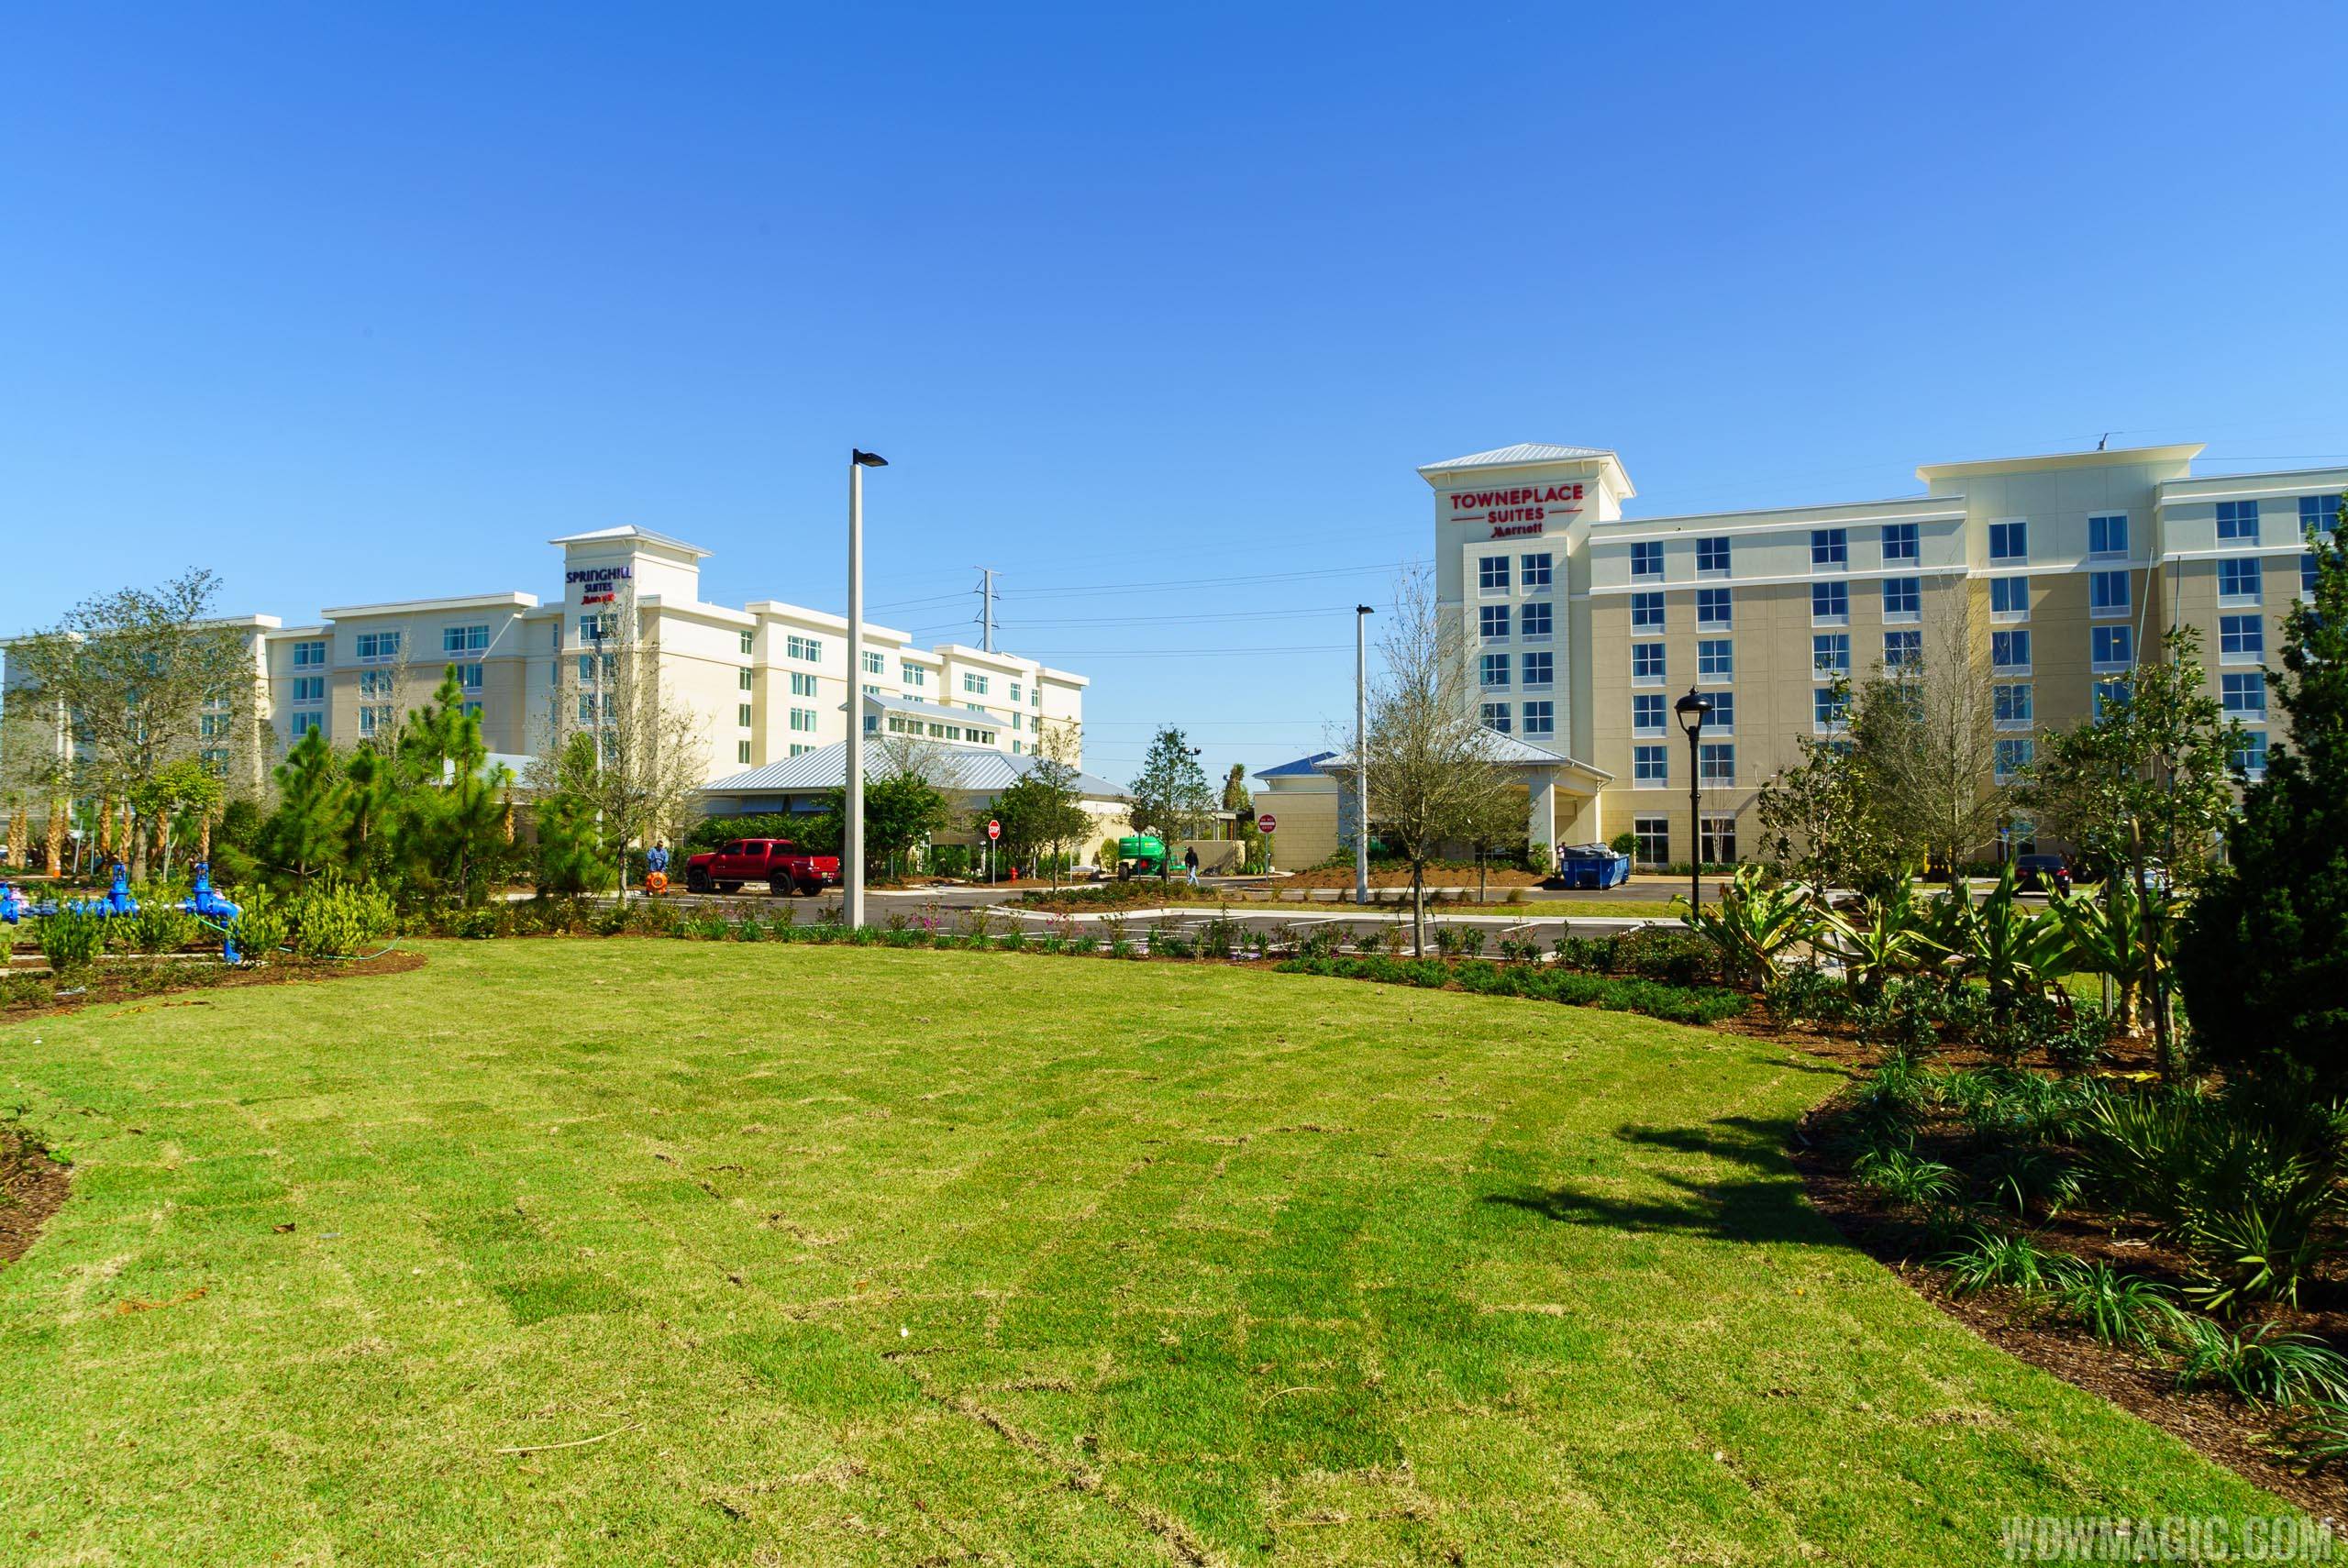 TownPlace Suites and SpringHill Suites at Flamingo Crossings